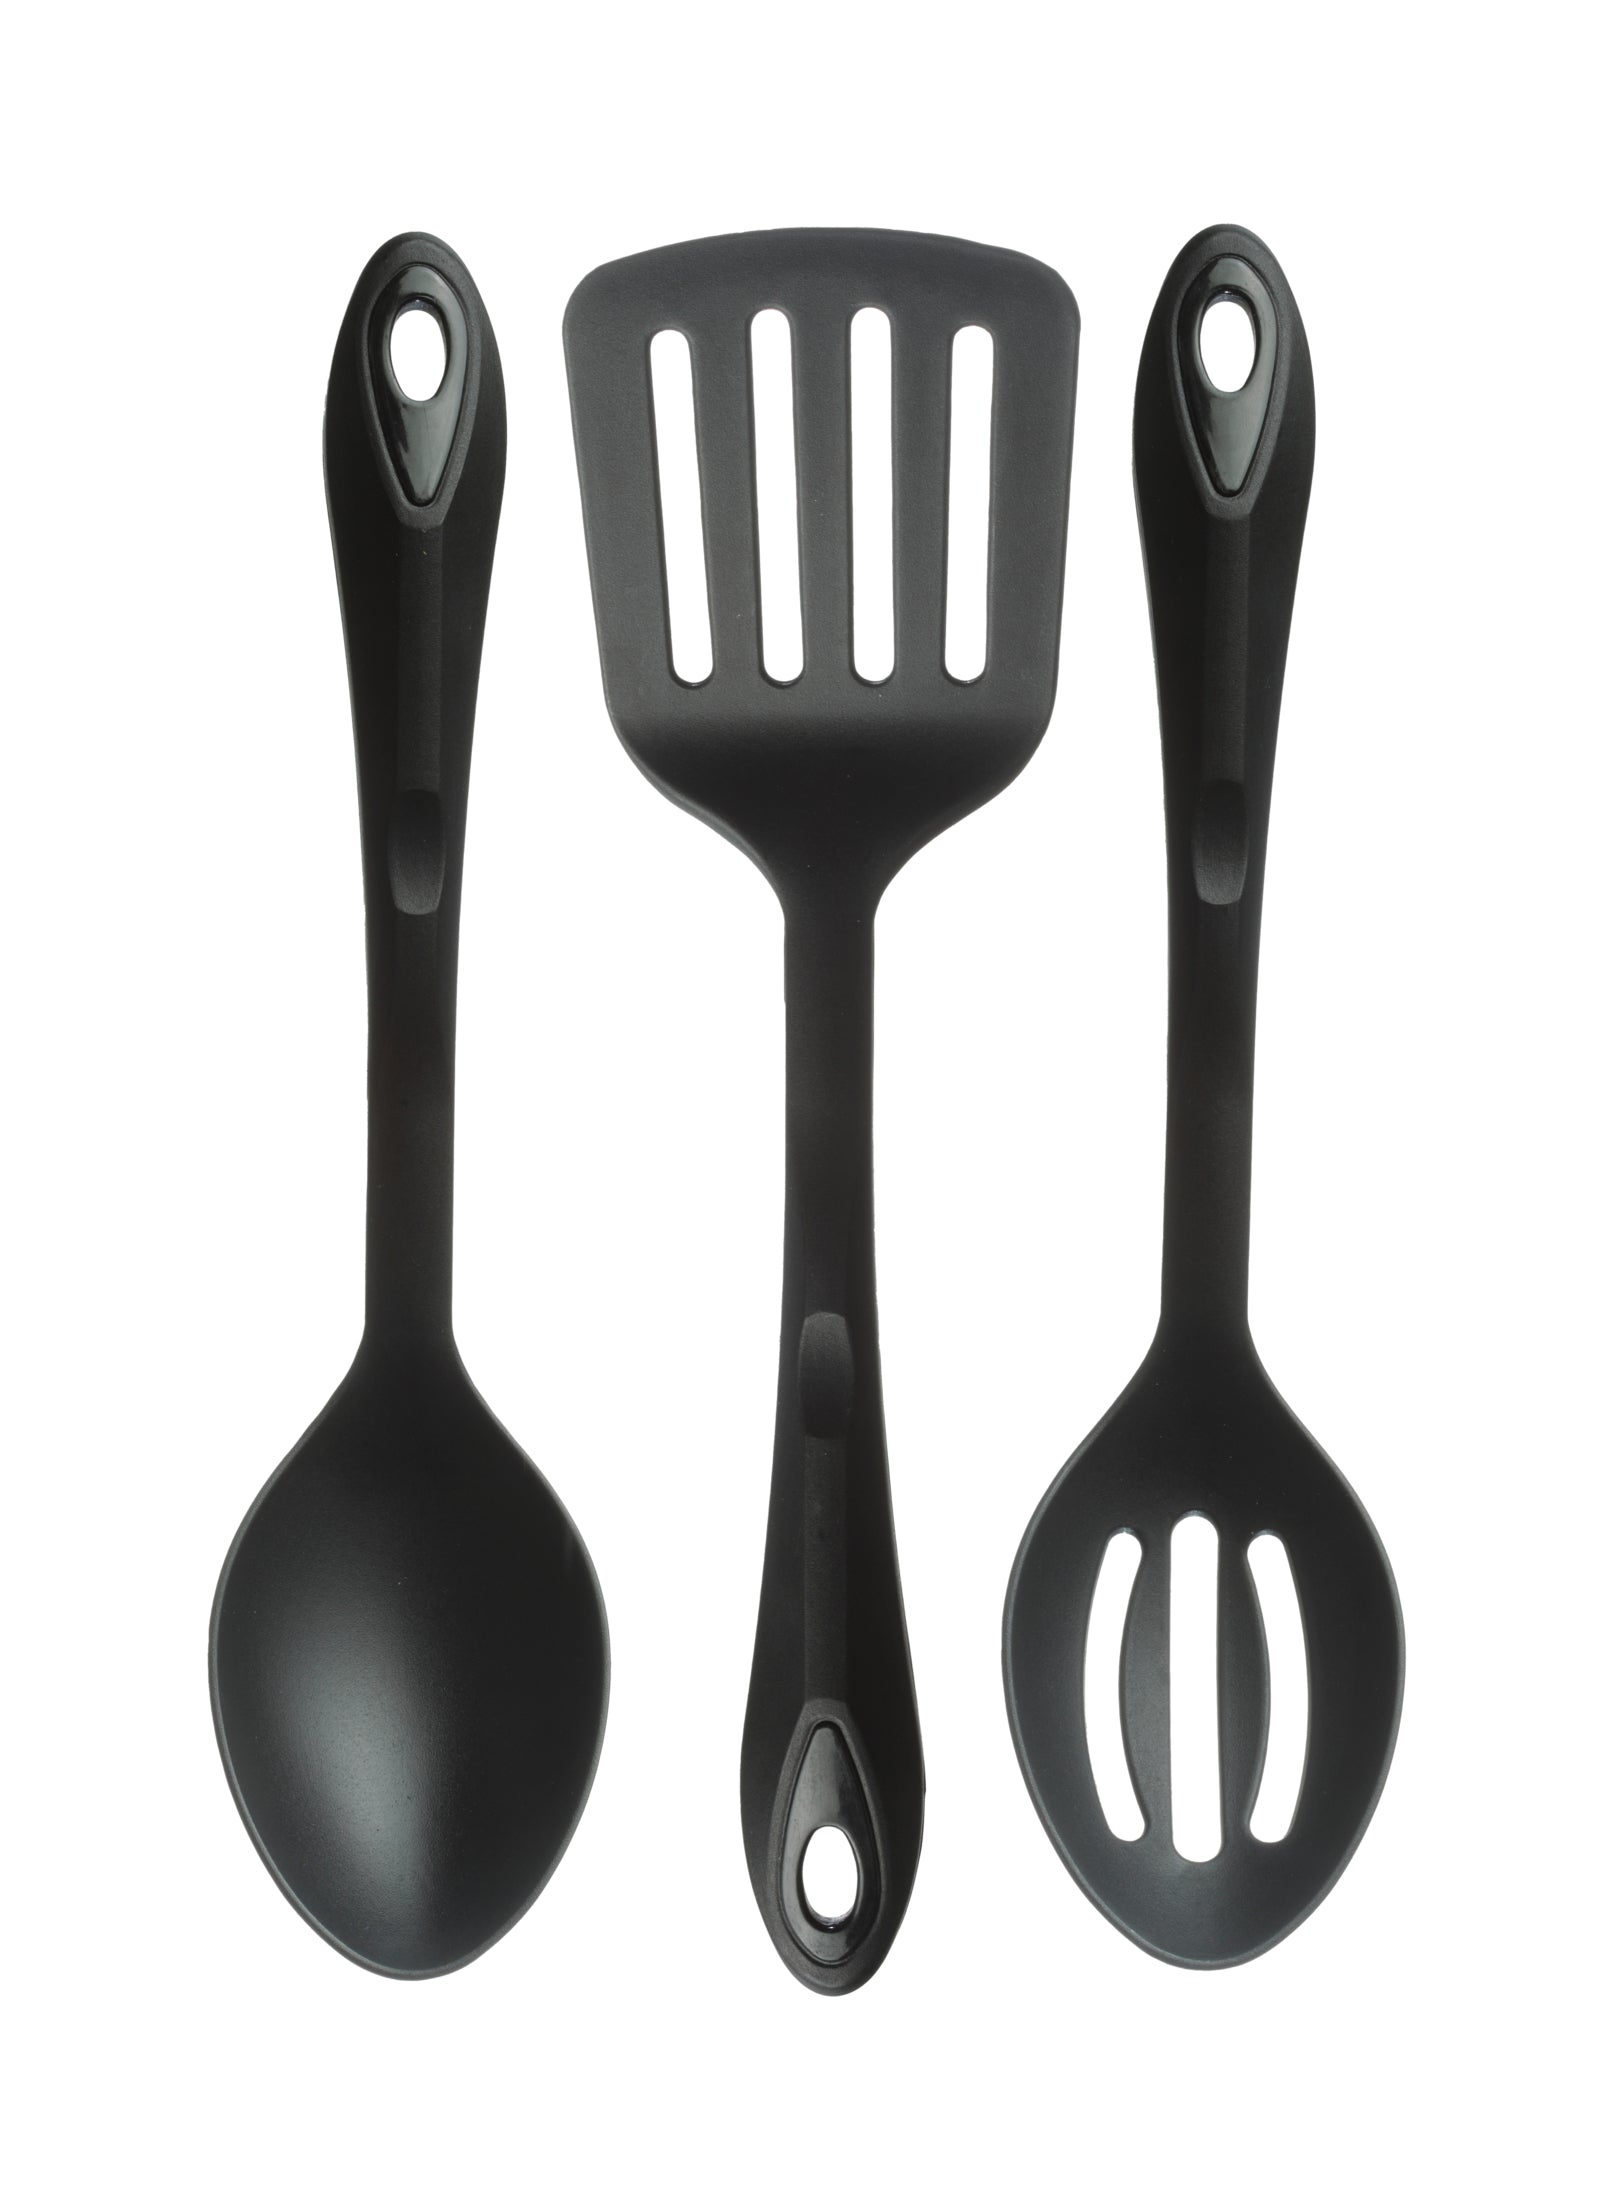 One slotted spoon, One Spatula, One Serving Spoon made of nylon sold as a set